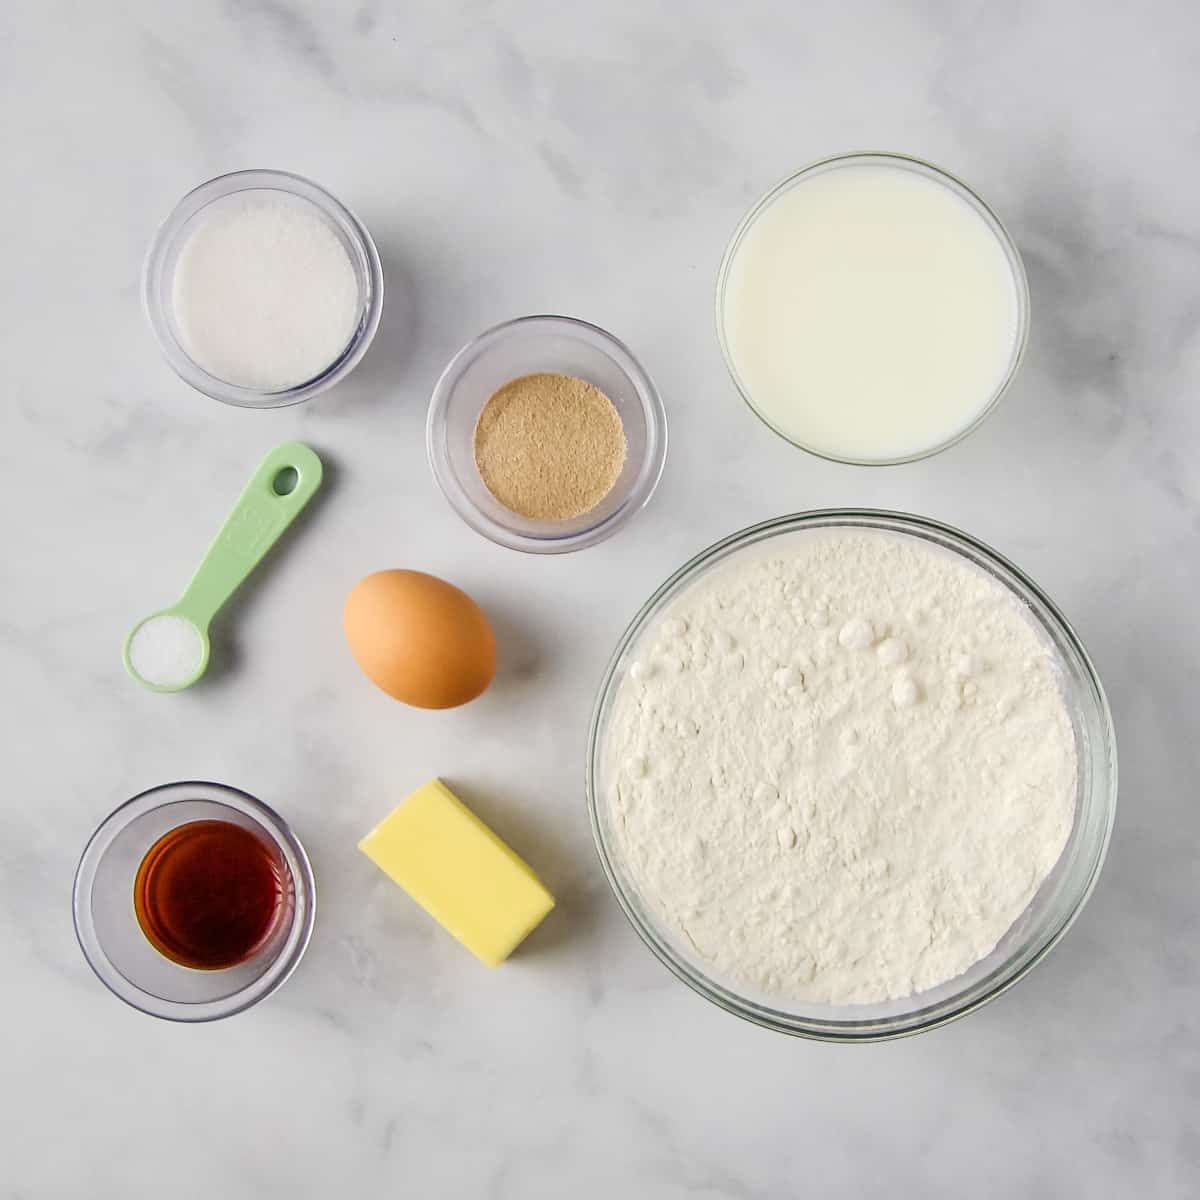 Cinnamon roll ingredients on a white marble countertop: flour, buttermilk, butter, sugar, yeast, egg, vanilla extract, and salt.